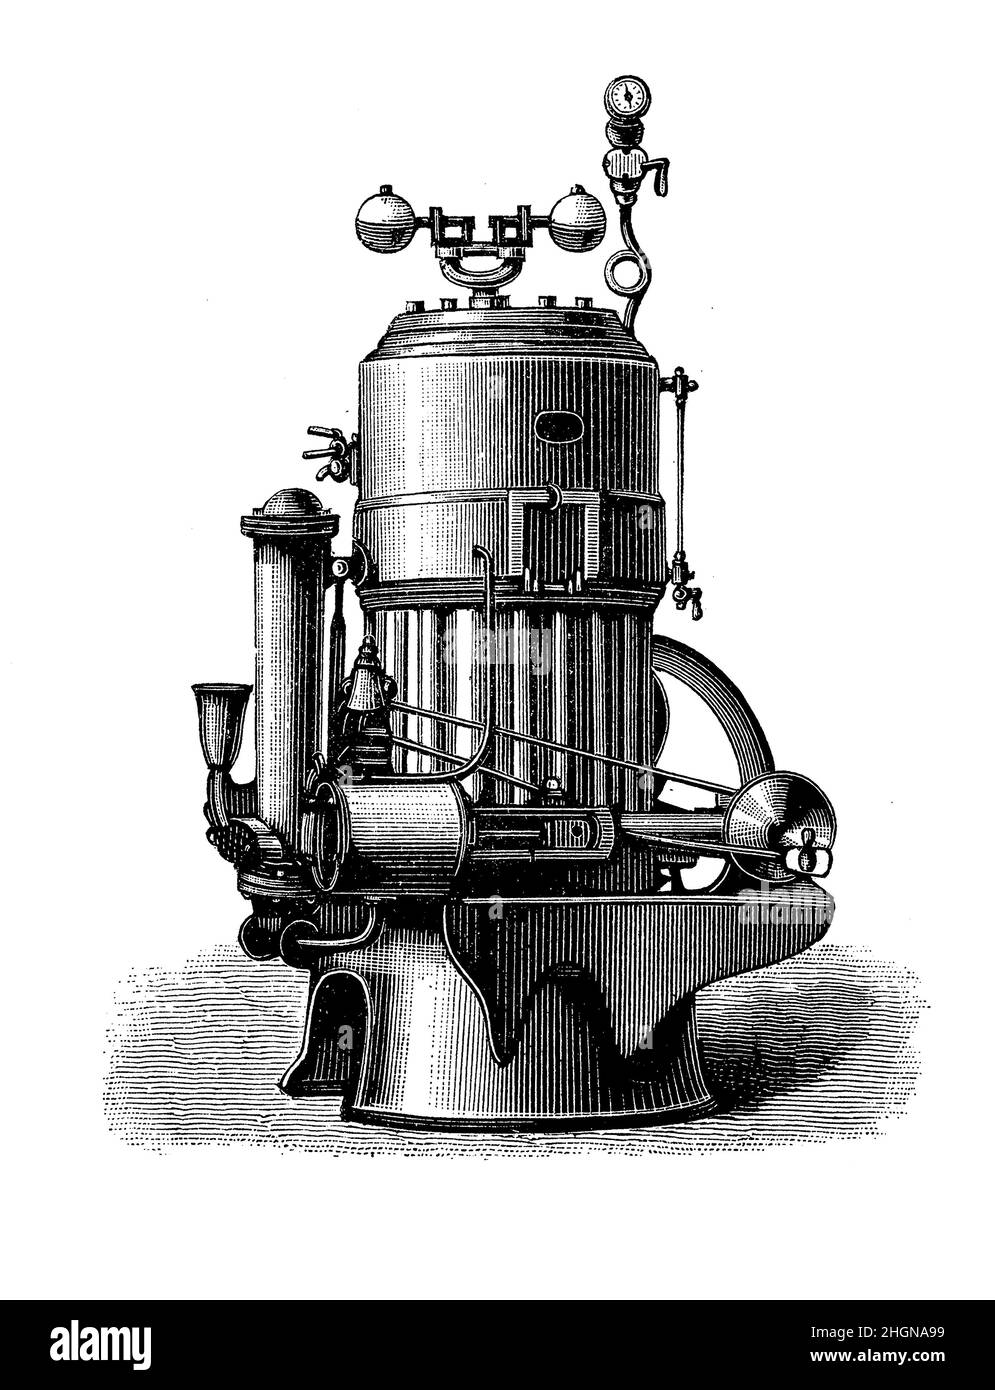 Steam-engine, heat engine producing mechanical work using steam pressure to push a piston inside a cylinder. Stock Photo